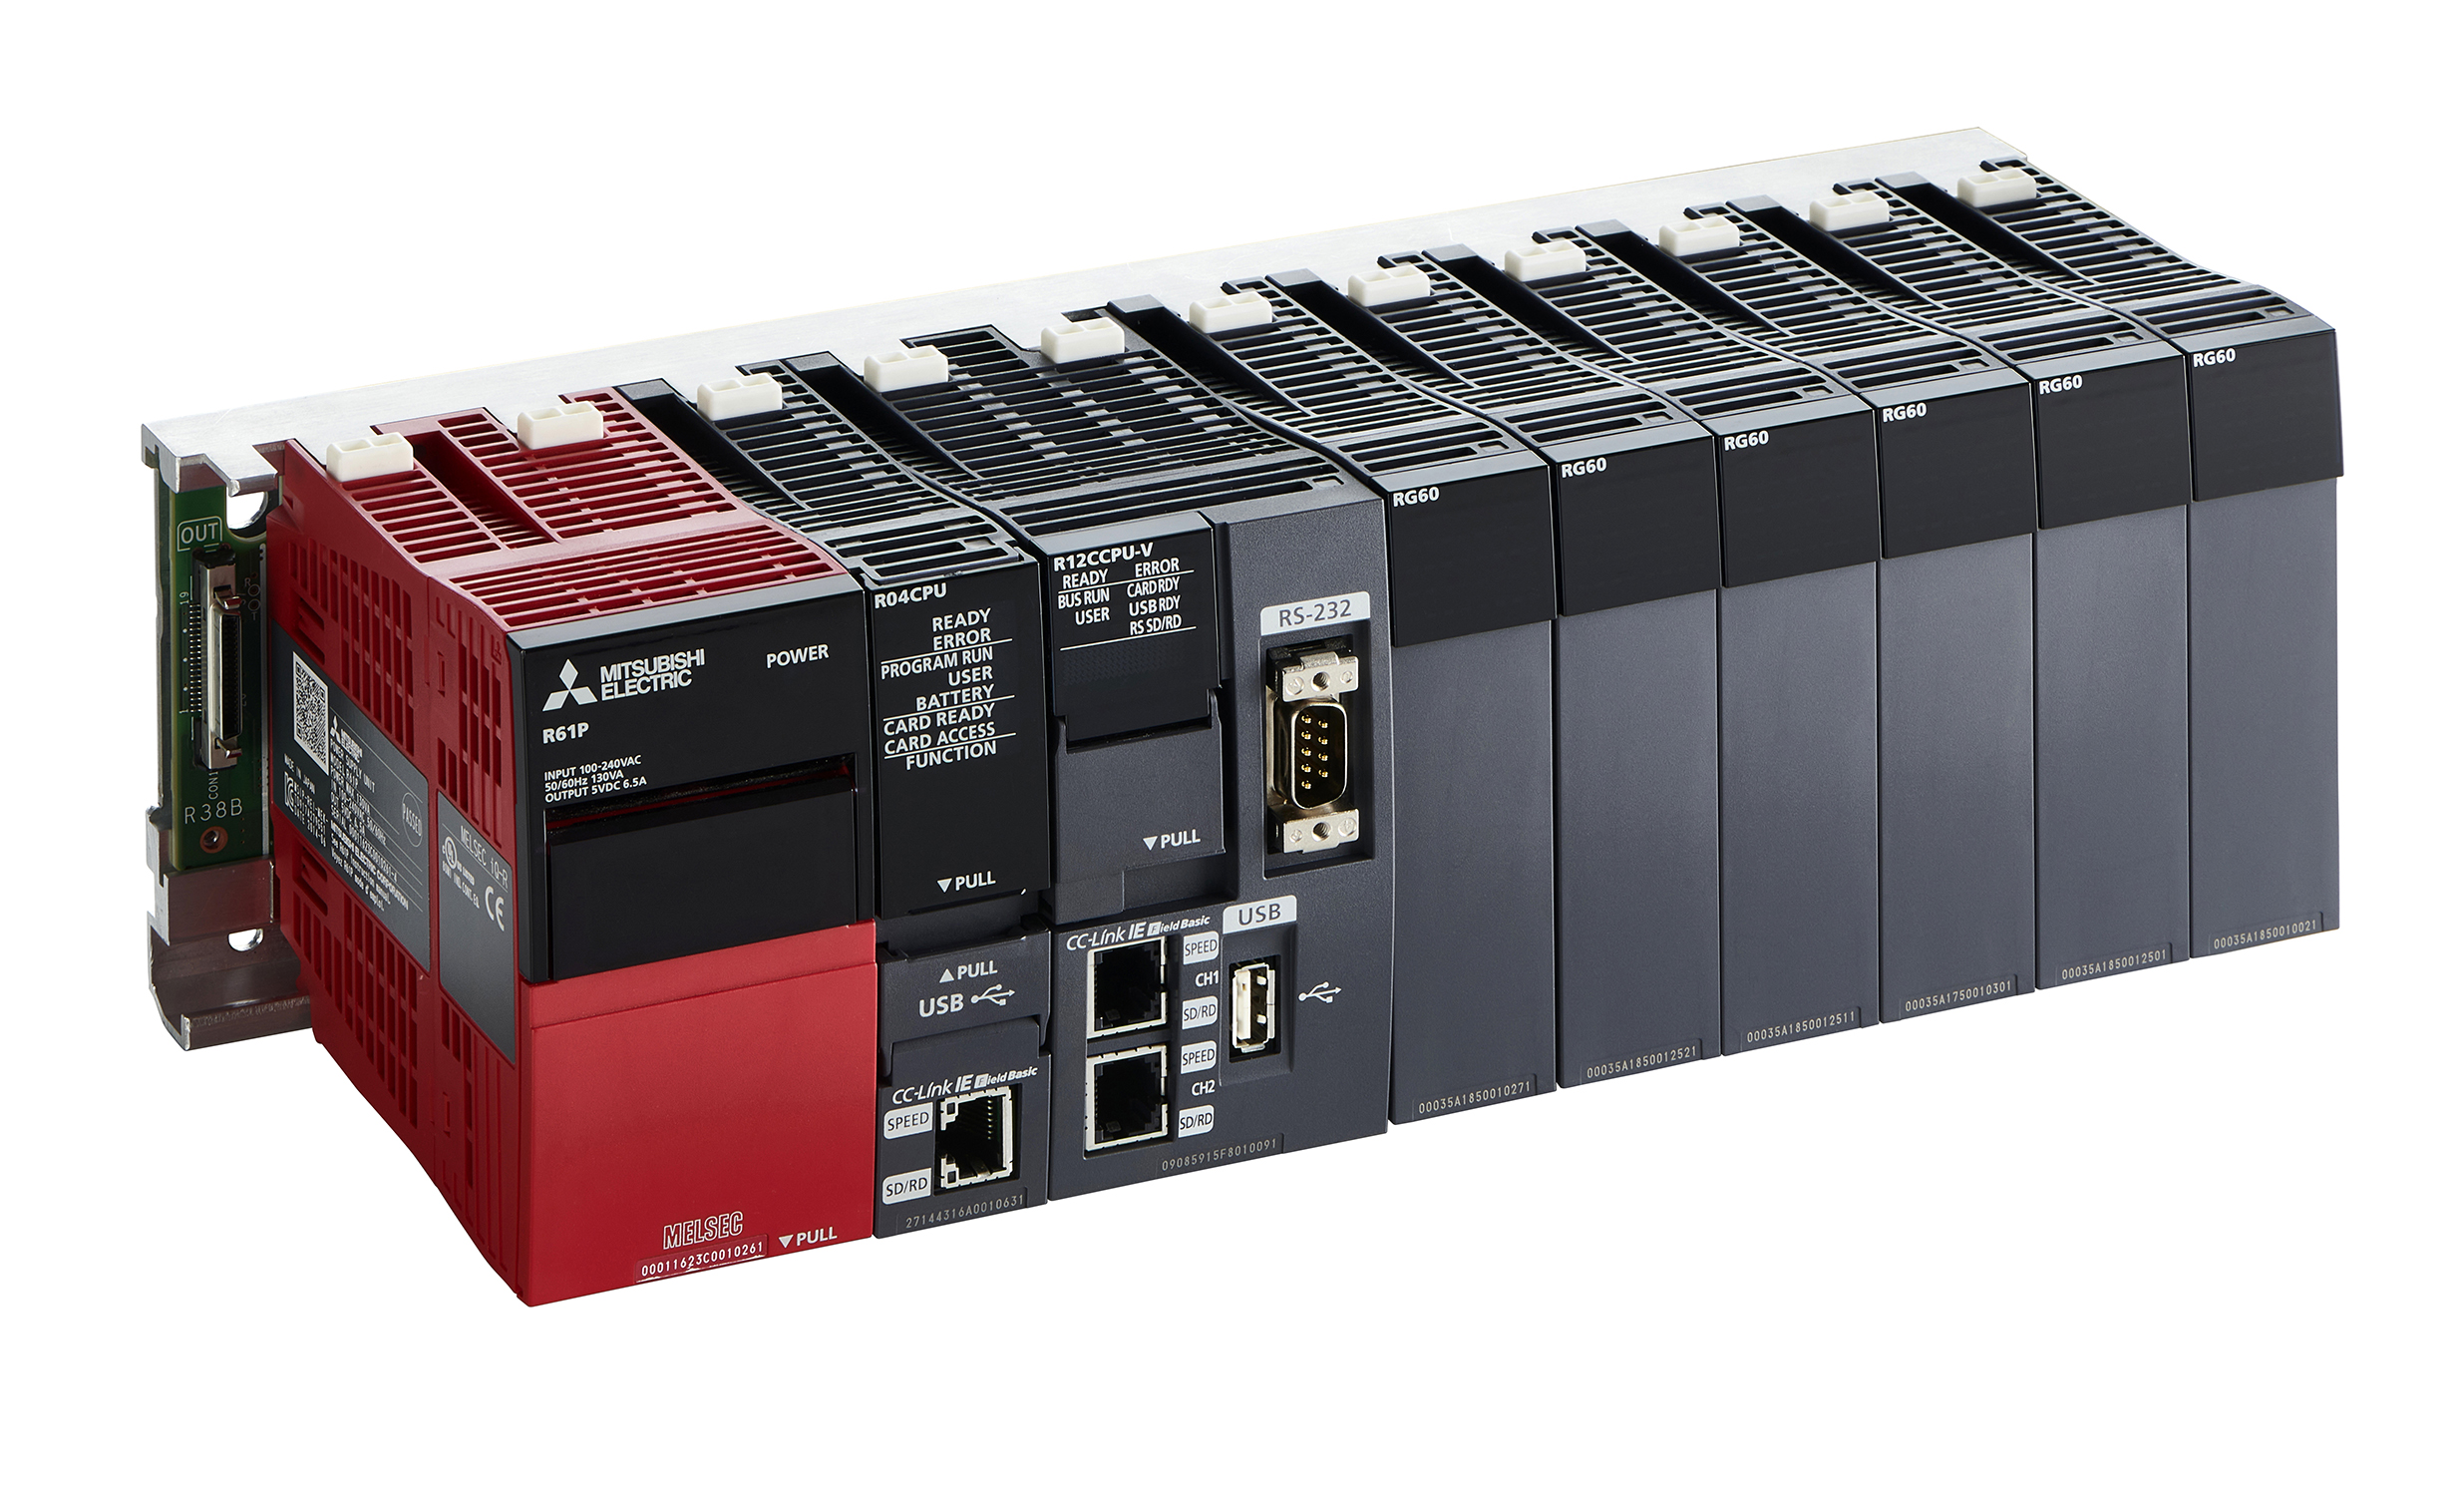 Mitsubishi Electric’s MELSEC iQ-R PLC now offers an innovative safety module option which provides the performance and integrity of a separate safety PLC but without the added cabinet space. [Source: Mitsubishi Electric Europe B.V.]